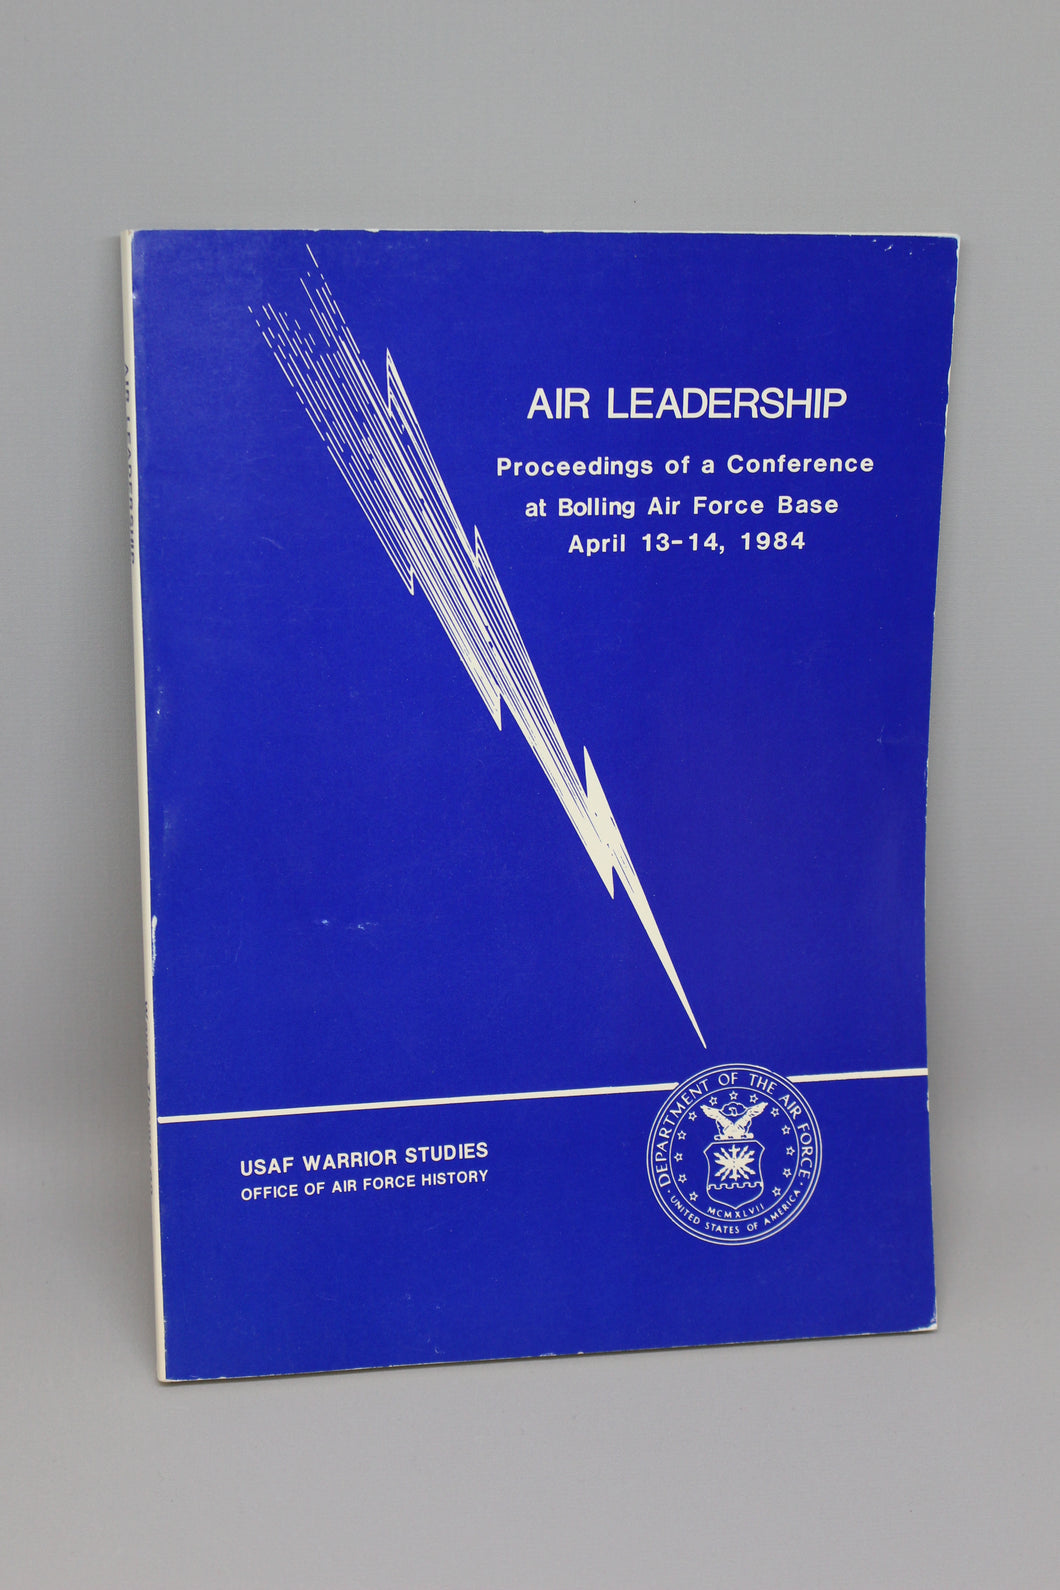 Air Leadership: Proceedings of a Conference at Bolling Air Force Base April 13-14, 1984